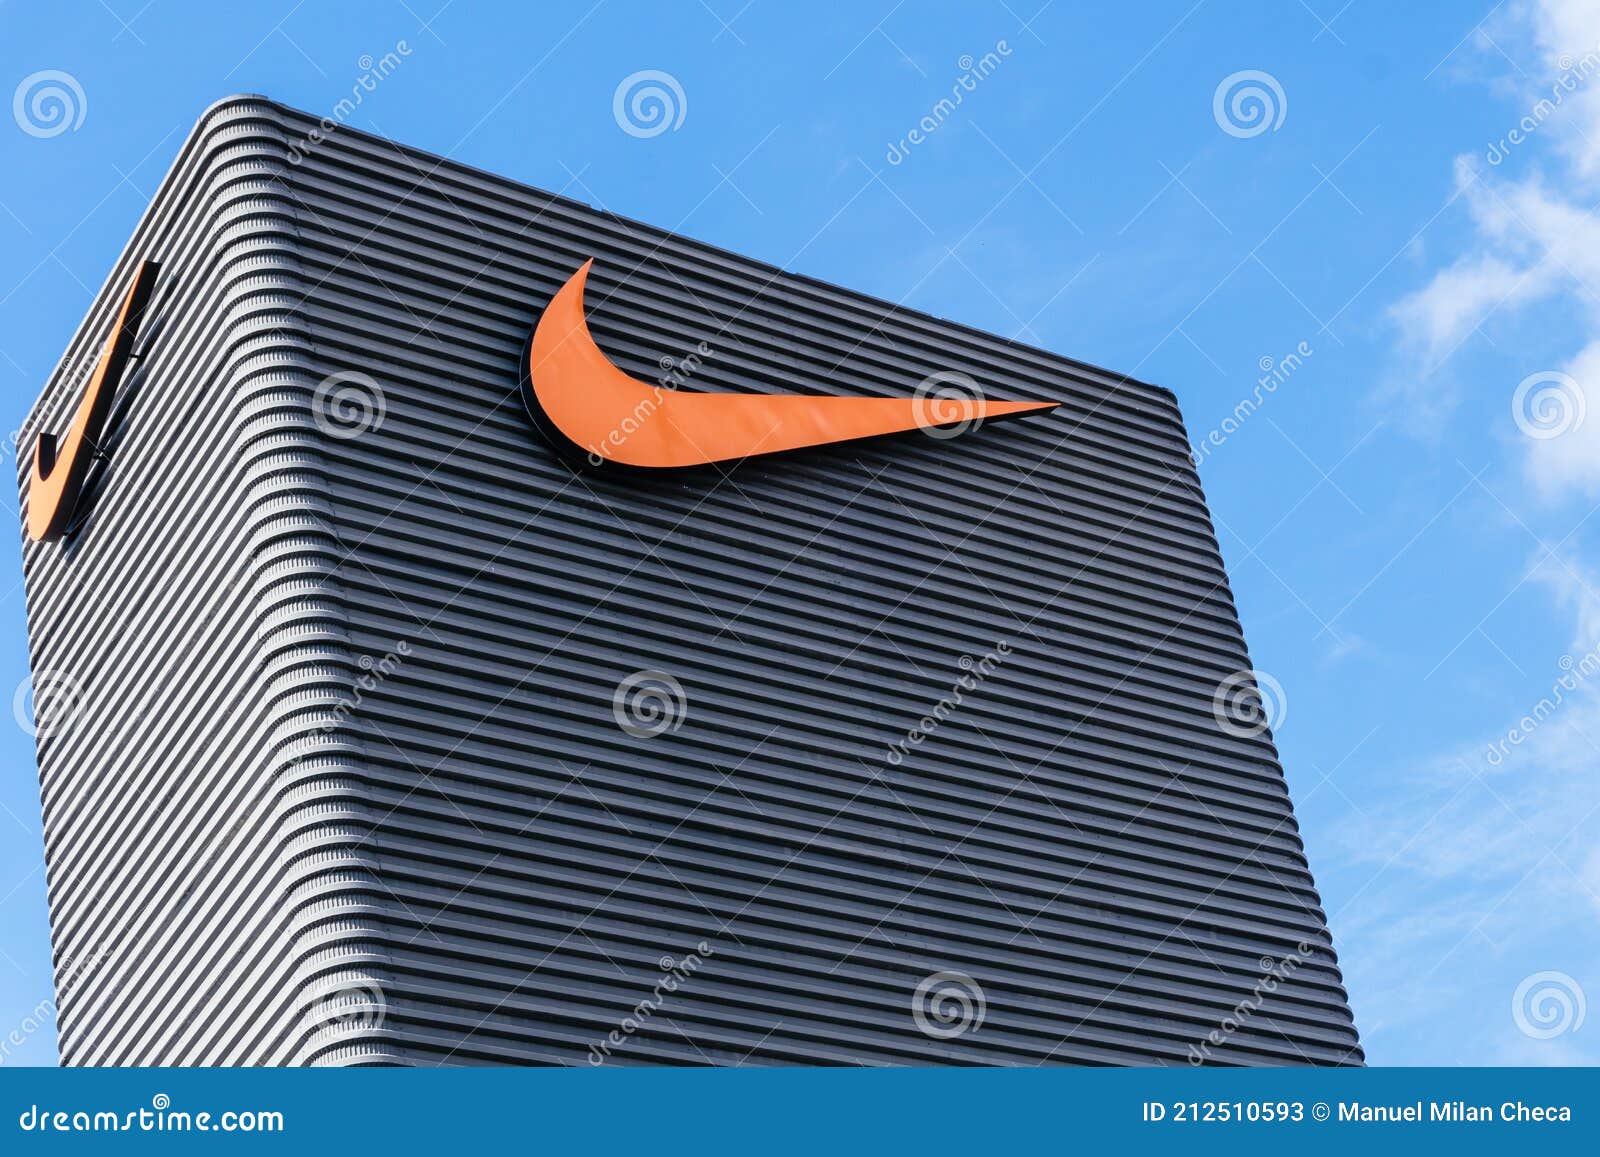 Badalona, Barcelona, Spain - February 28, 2021. Sign on the Facade of an American Multinational Company Dedicated To the Editorial Stock Photo - of sportswear, nike: 212510593